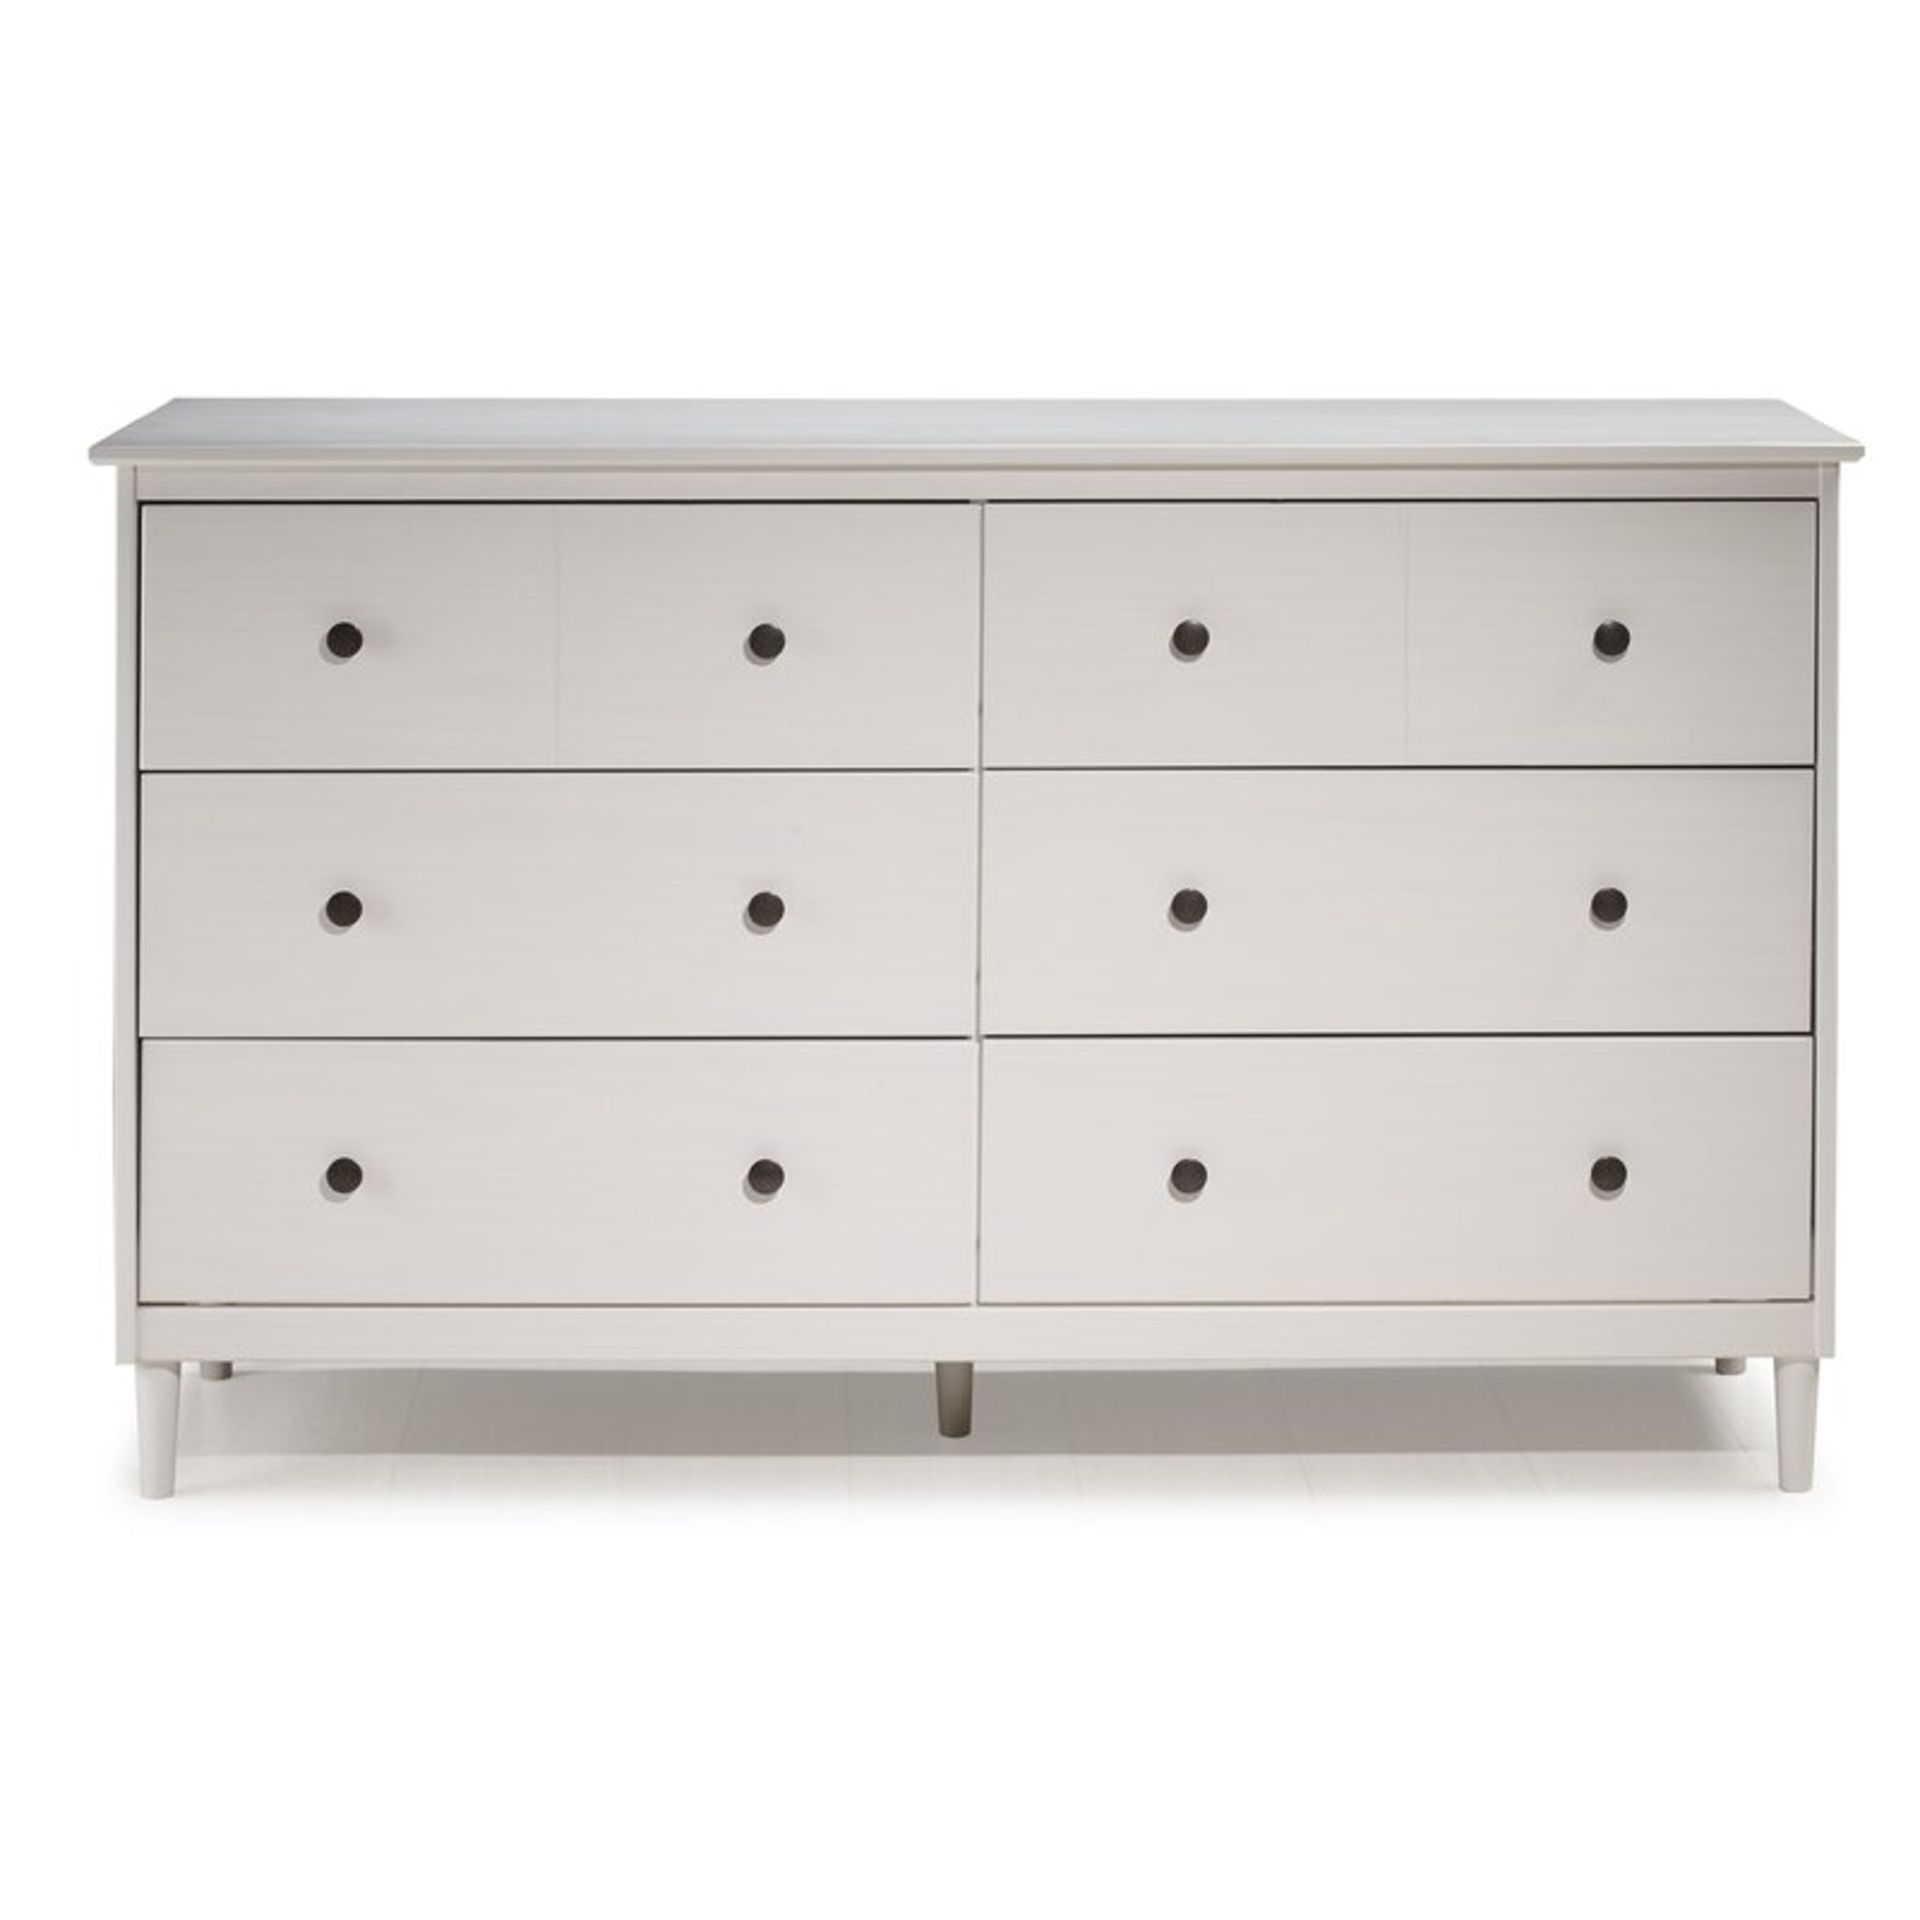 Tylor 6 Drawer Chest - RRP £386.99 - Image 3 of 4